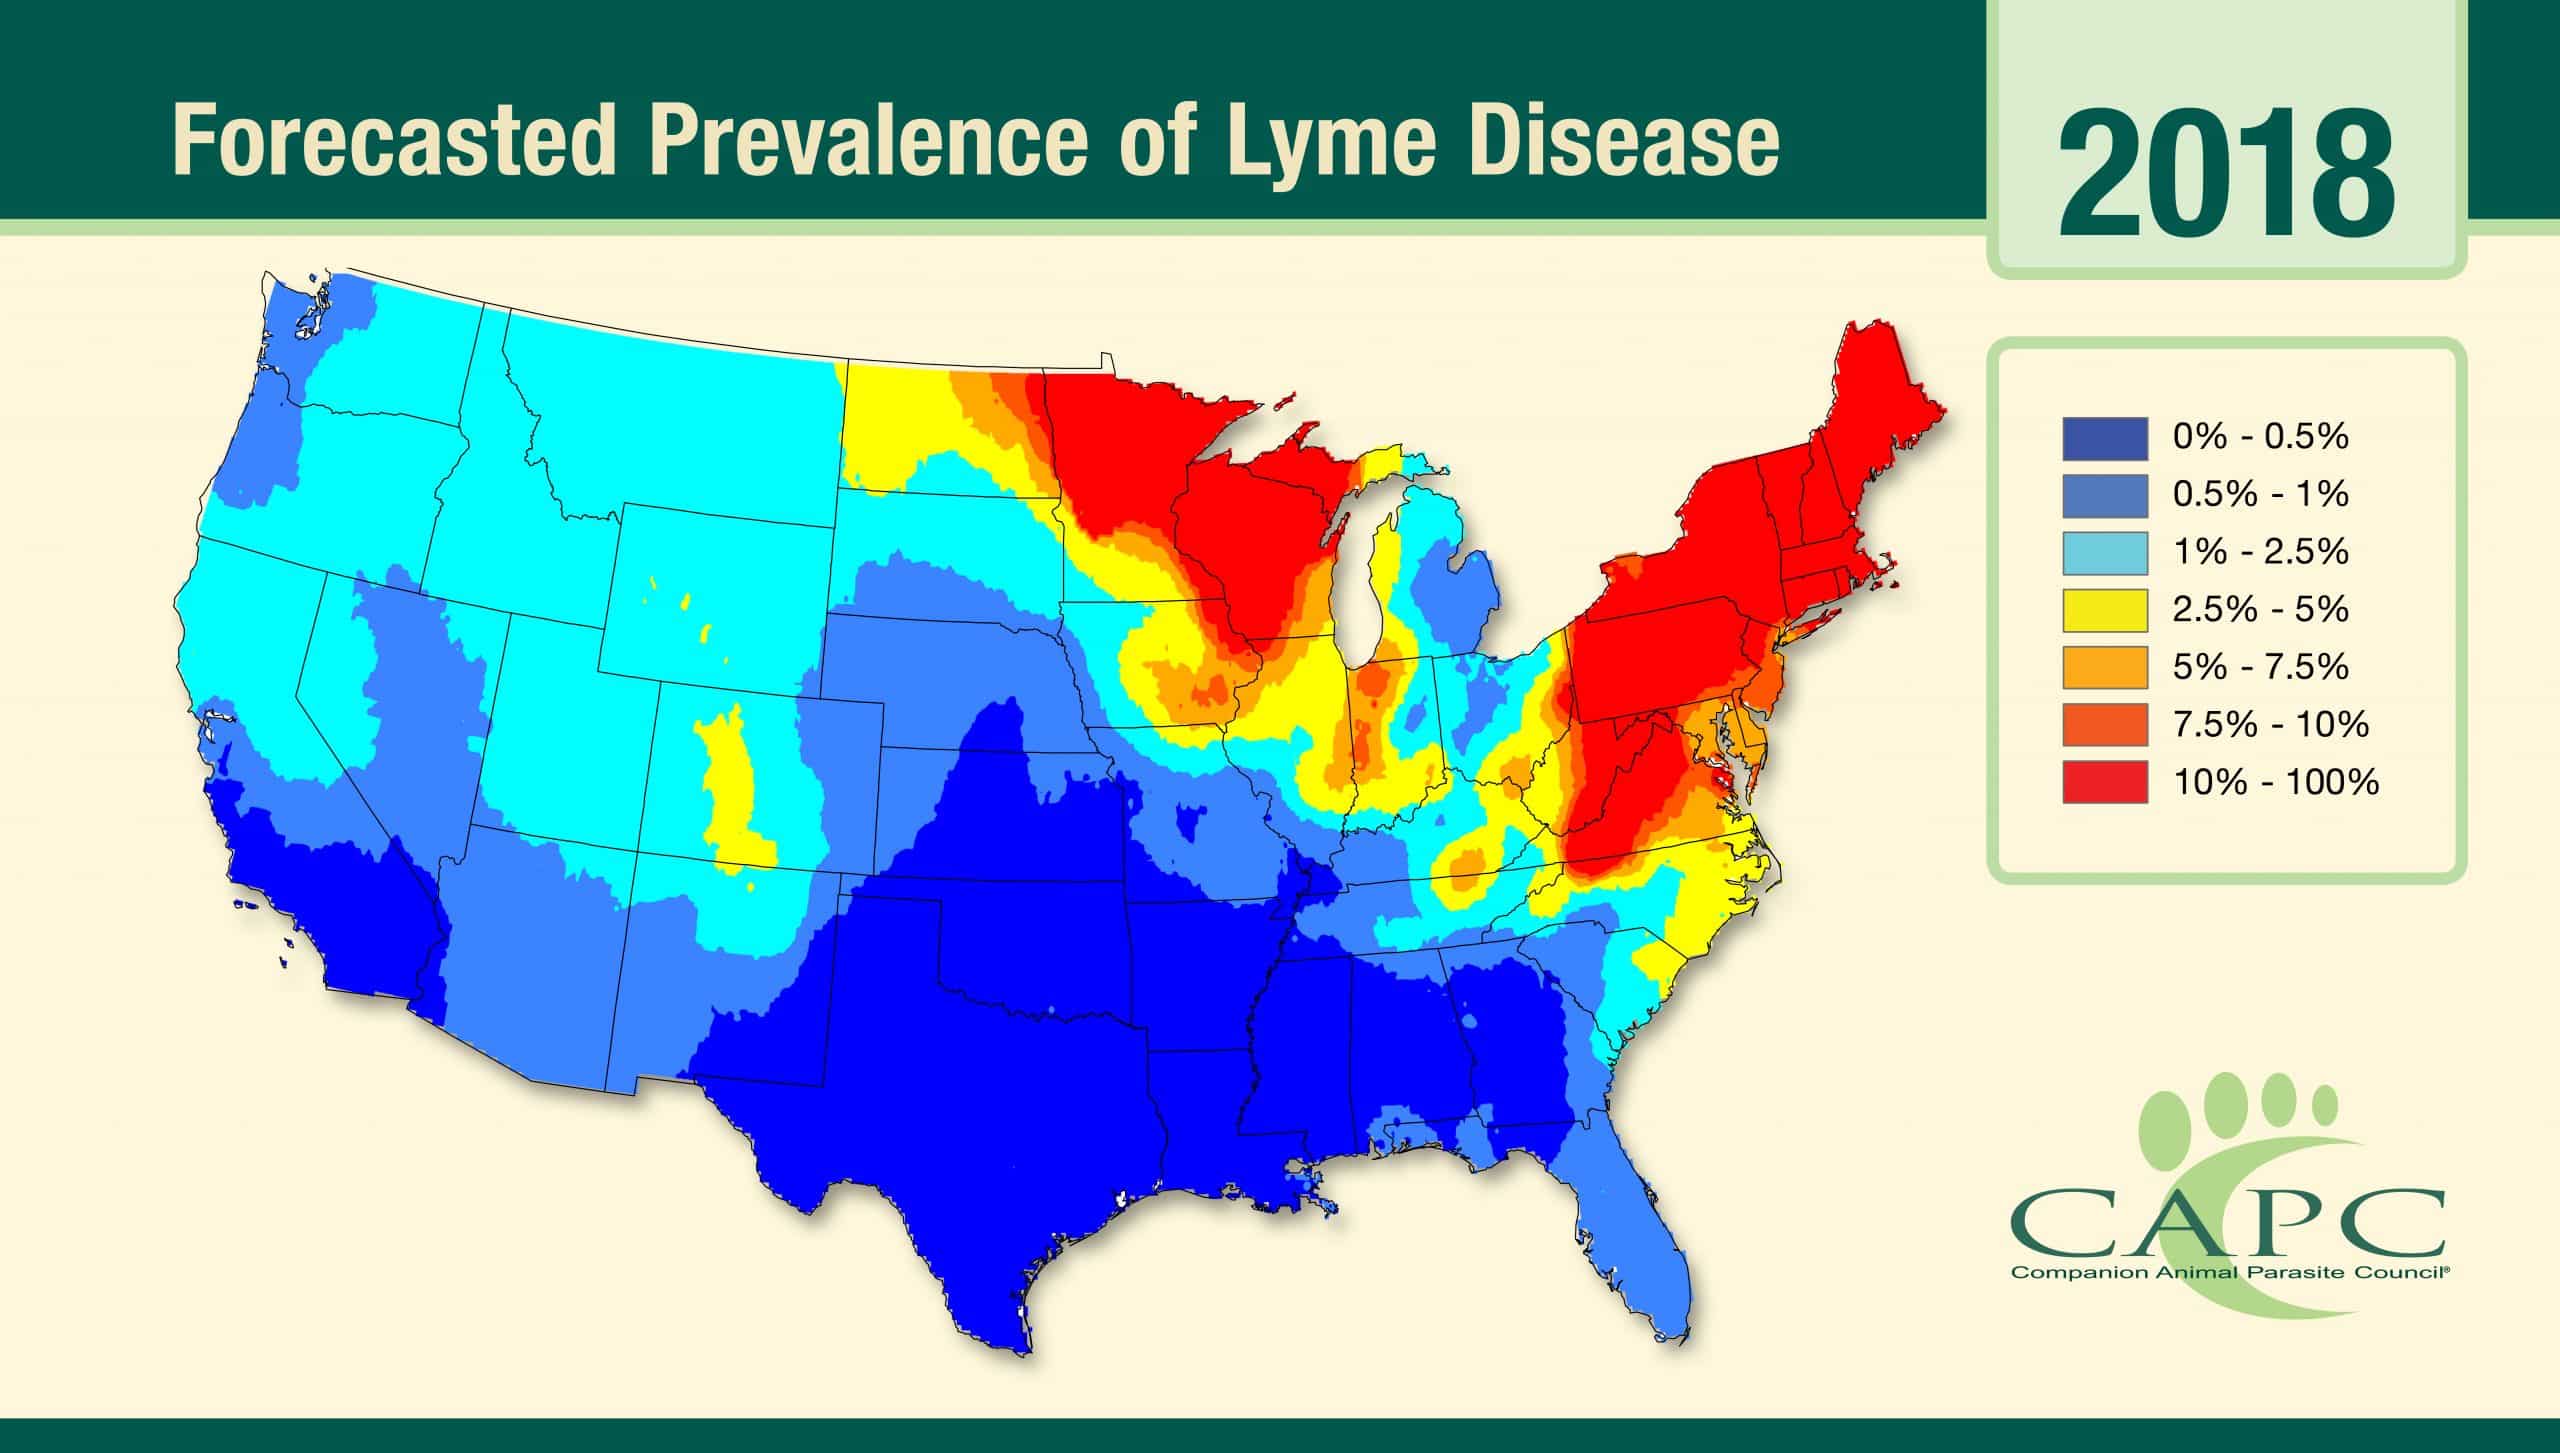 Canine Lyme Disease: An Expanding Concern